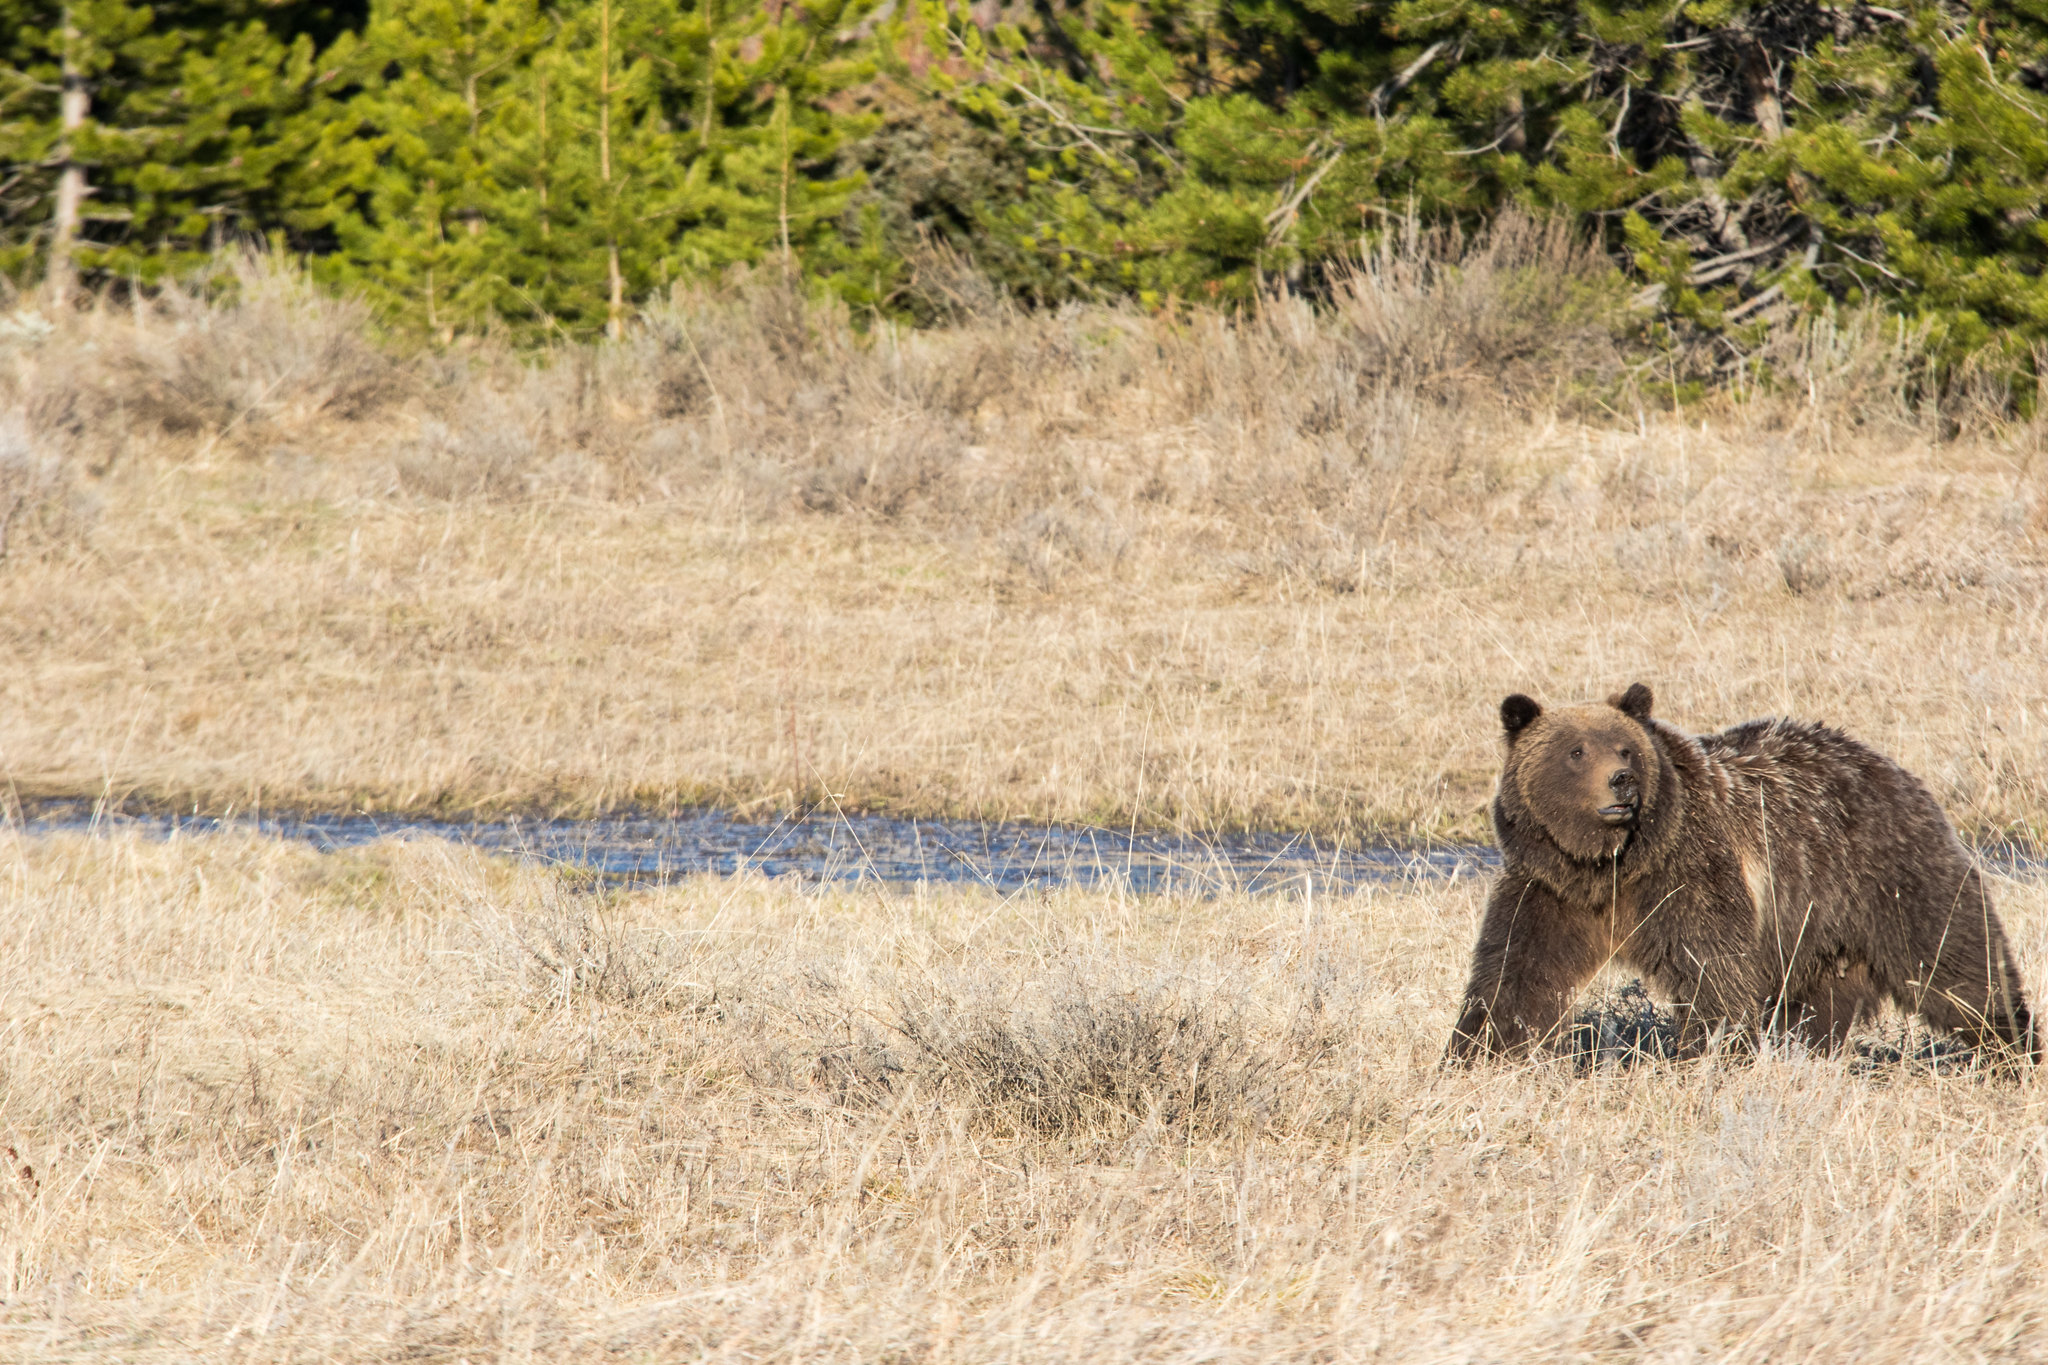 A grizzly bear sow walks in a field in Grand Teton National Park